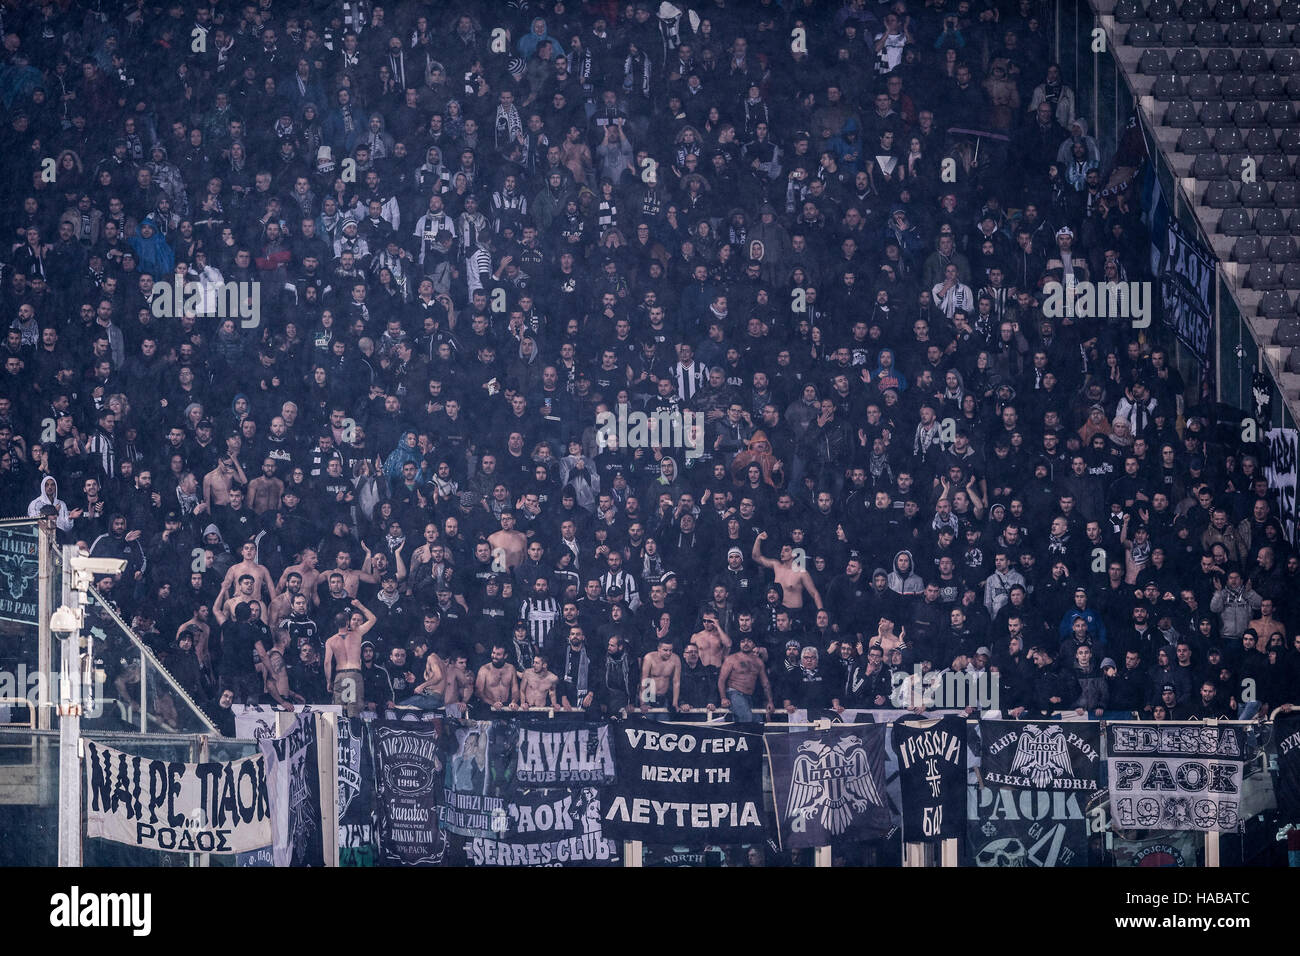 Friendly Match RSC Anderlecht Vs PAOK Editorial Stock Image - Image of  champions, europa: 123390749